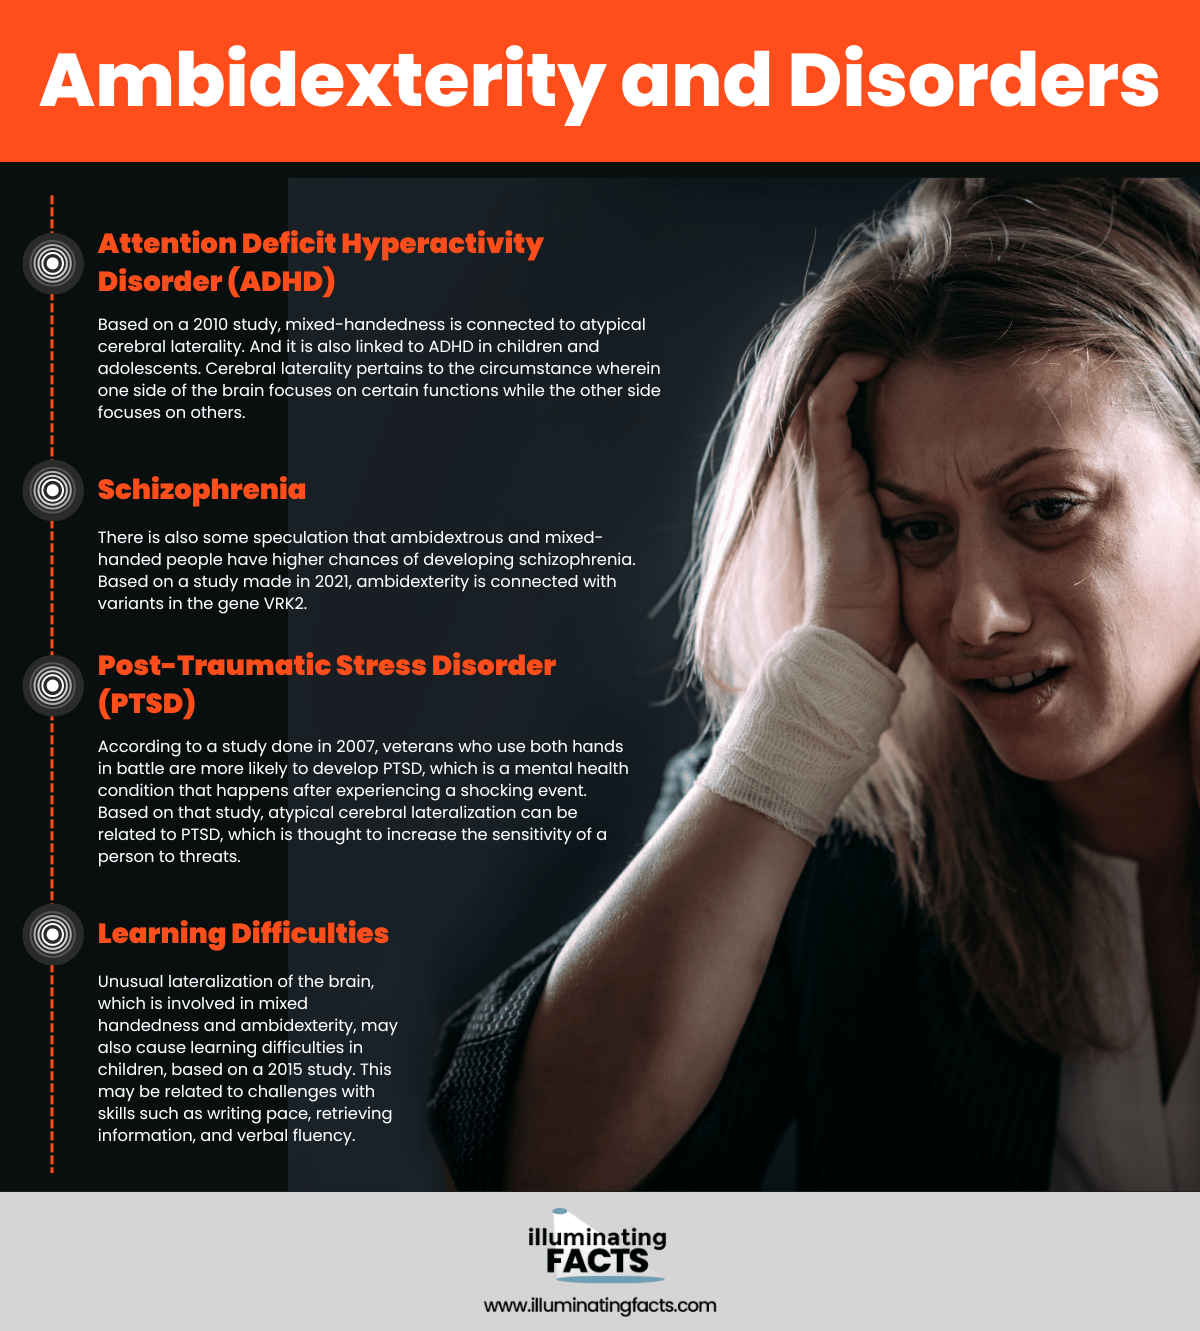 Ambidexterity and Disorders